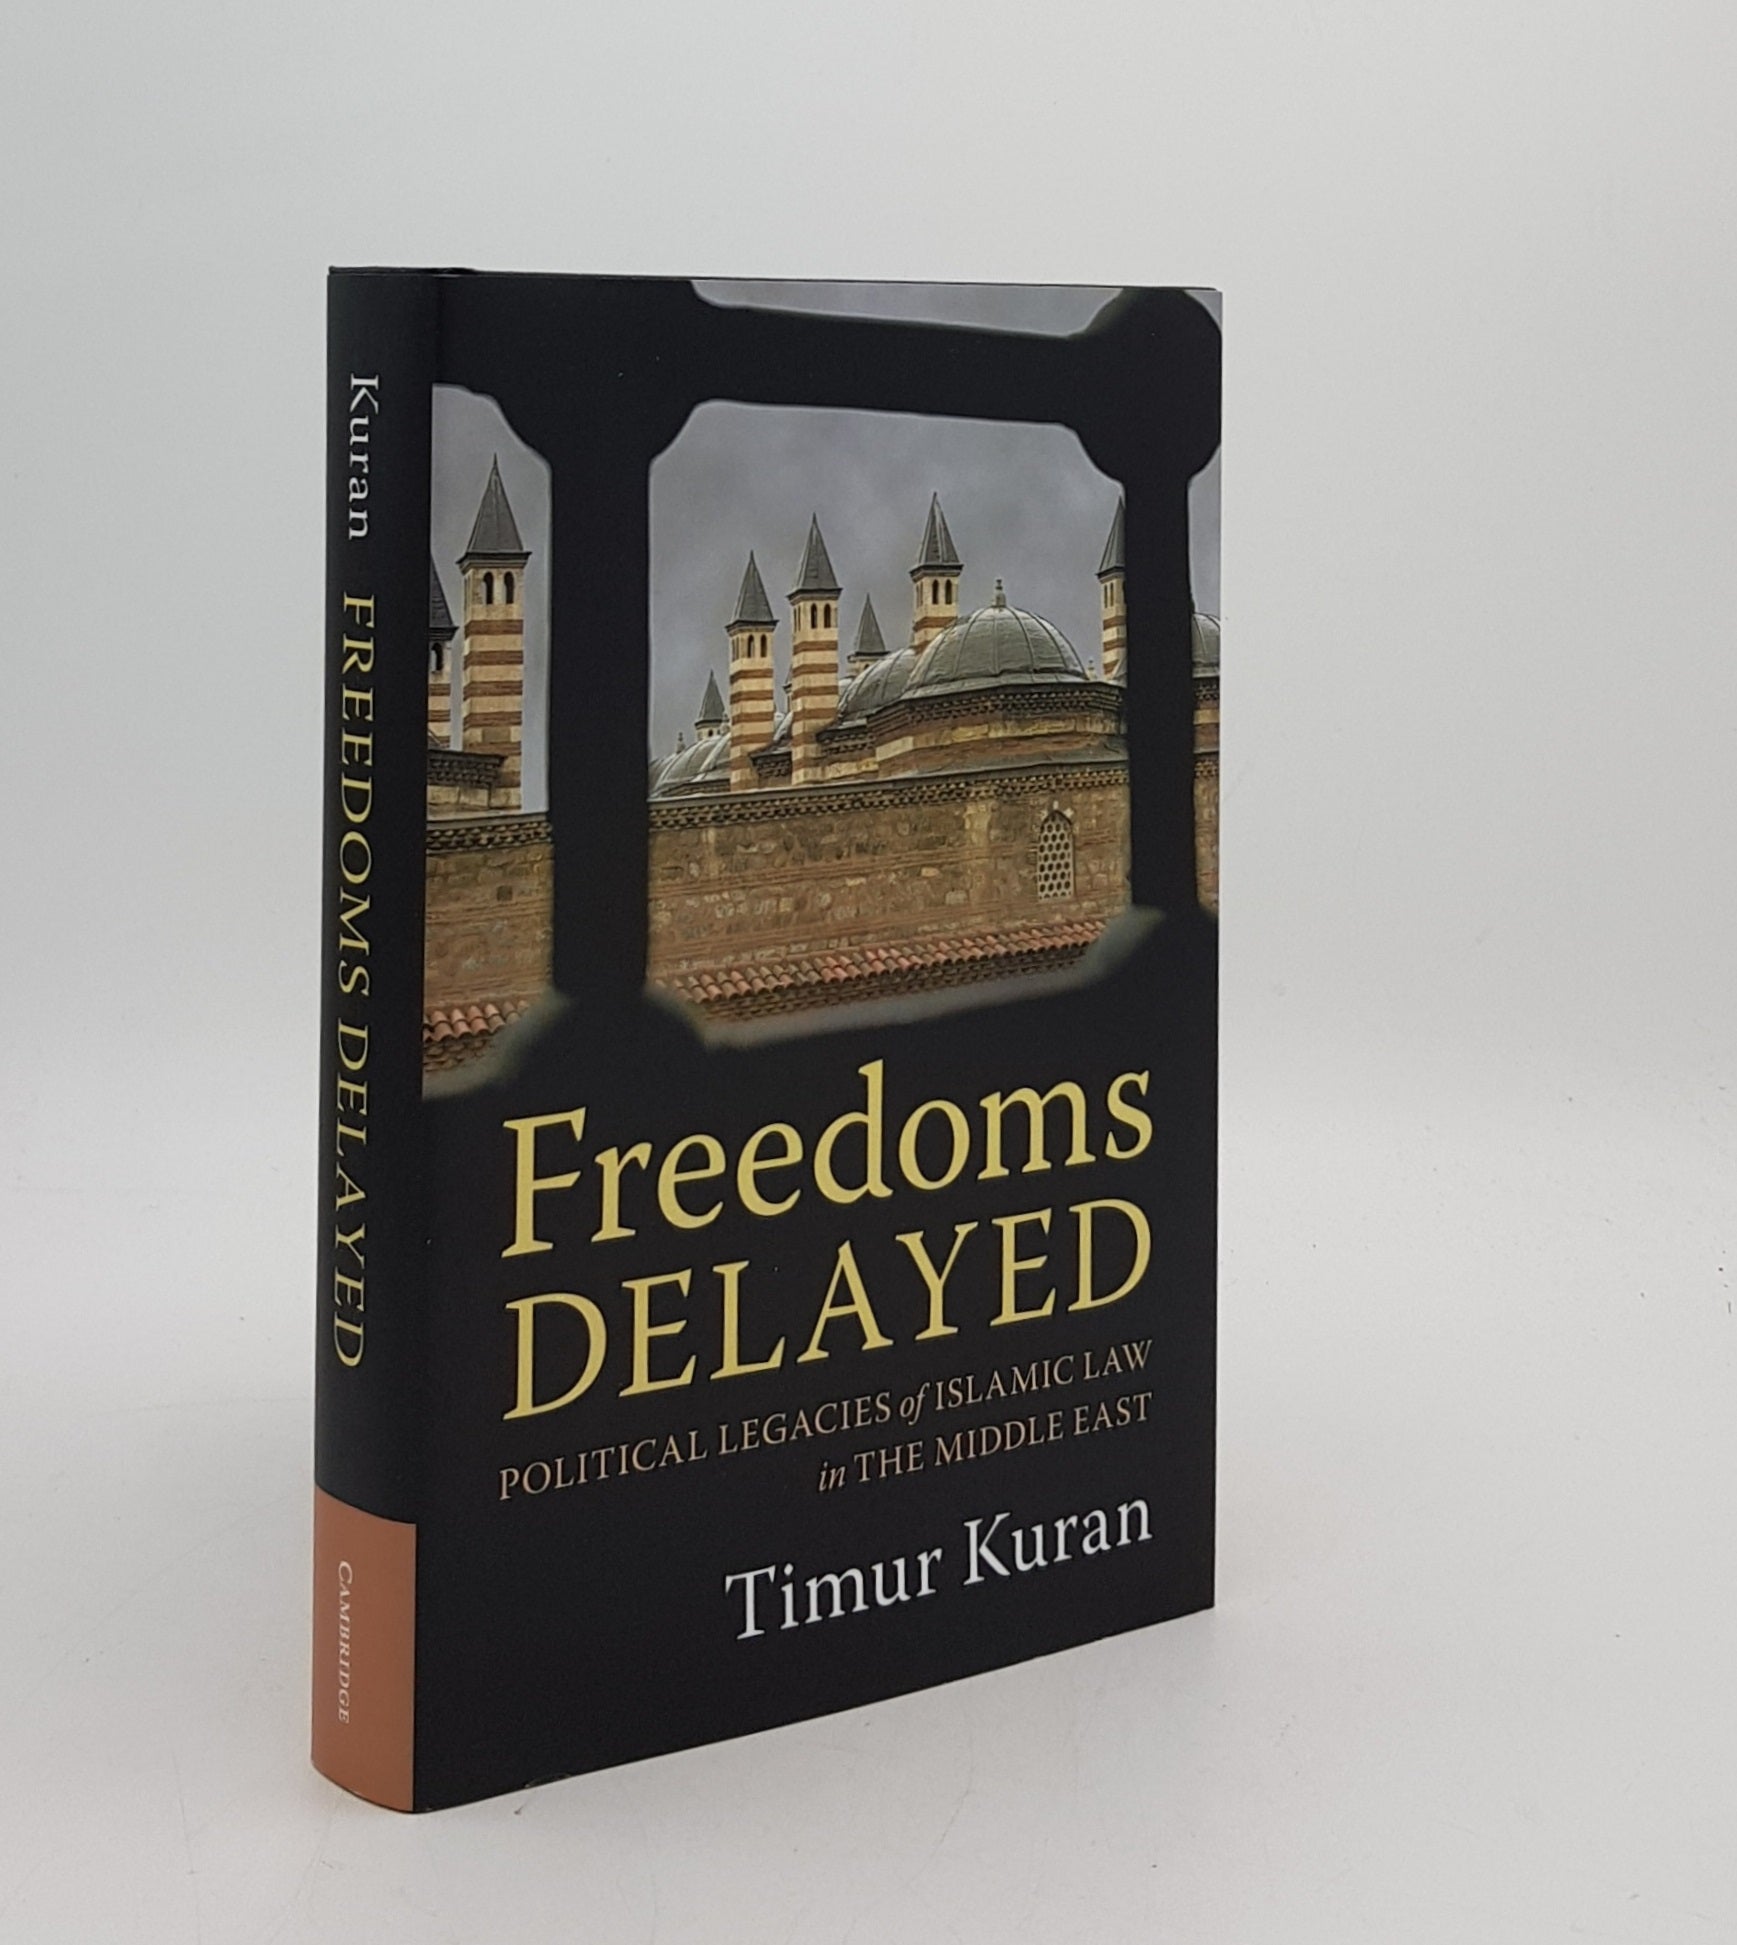 KURAN Timur - Freedoms Delayed Political Legacies of Islamic Law in the Middle East